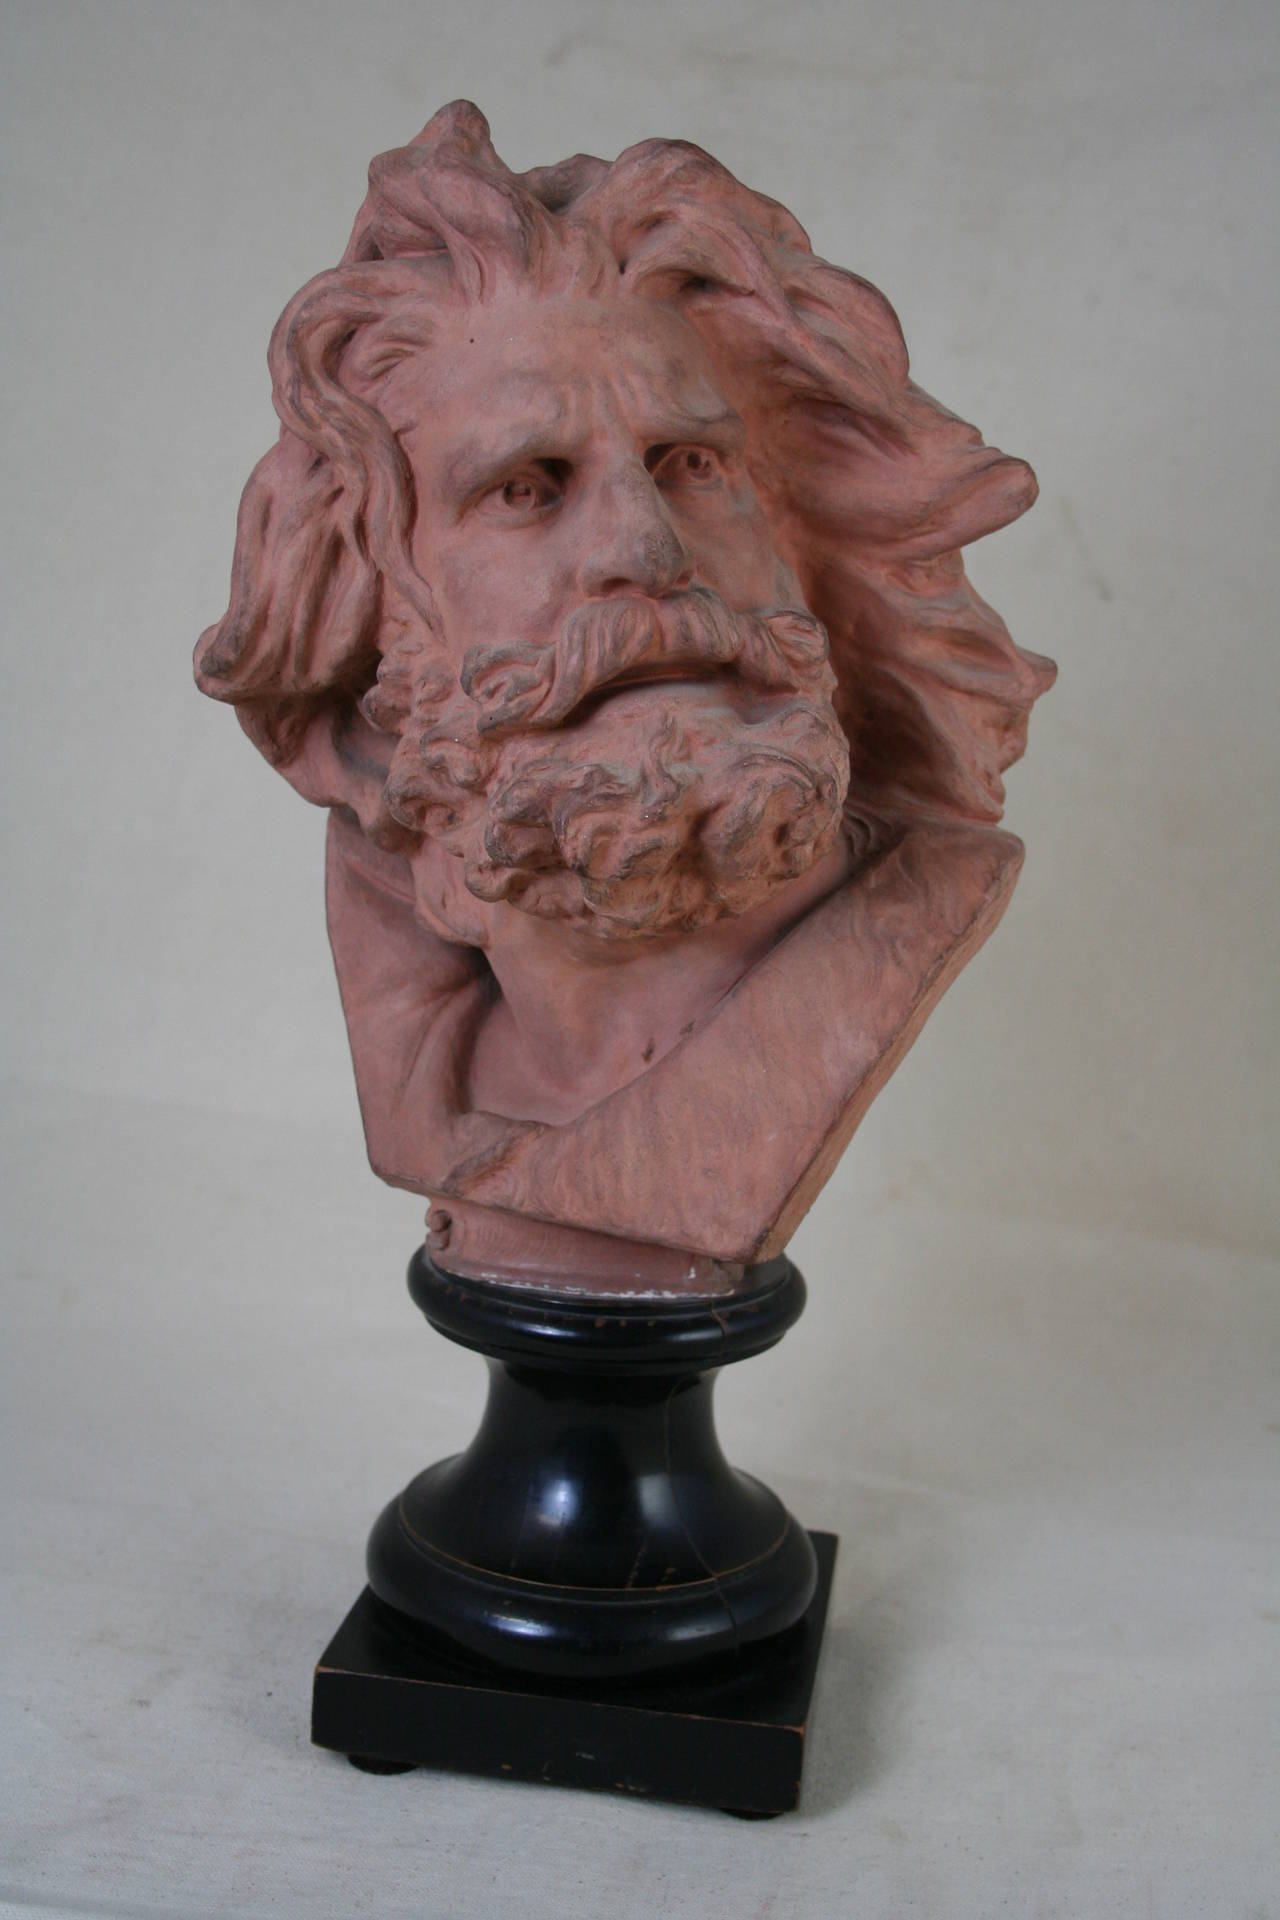 This 19th century terra cotta bust is mounted on an ebonized wooden base. The 